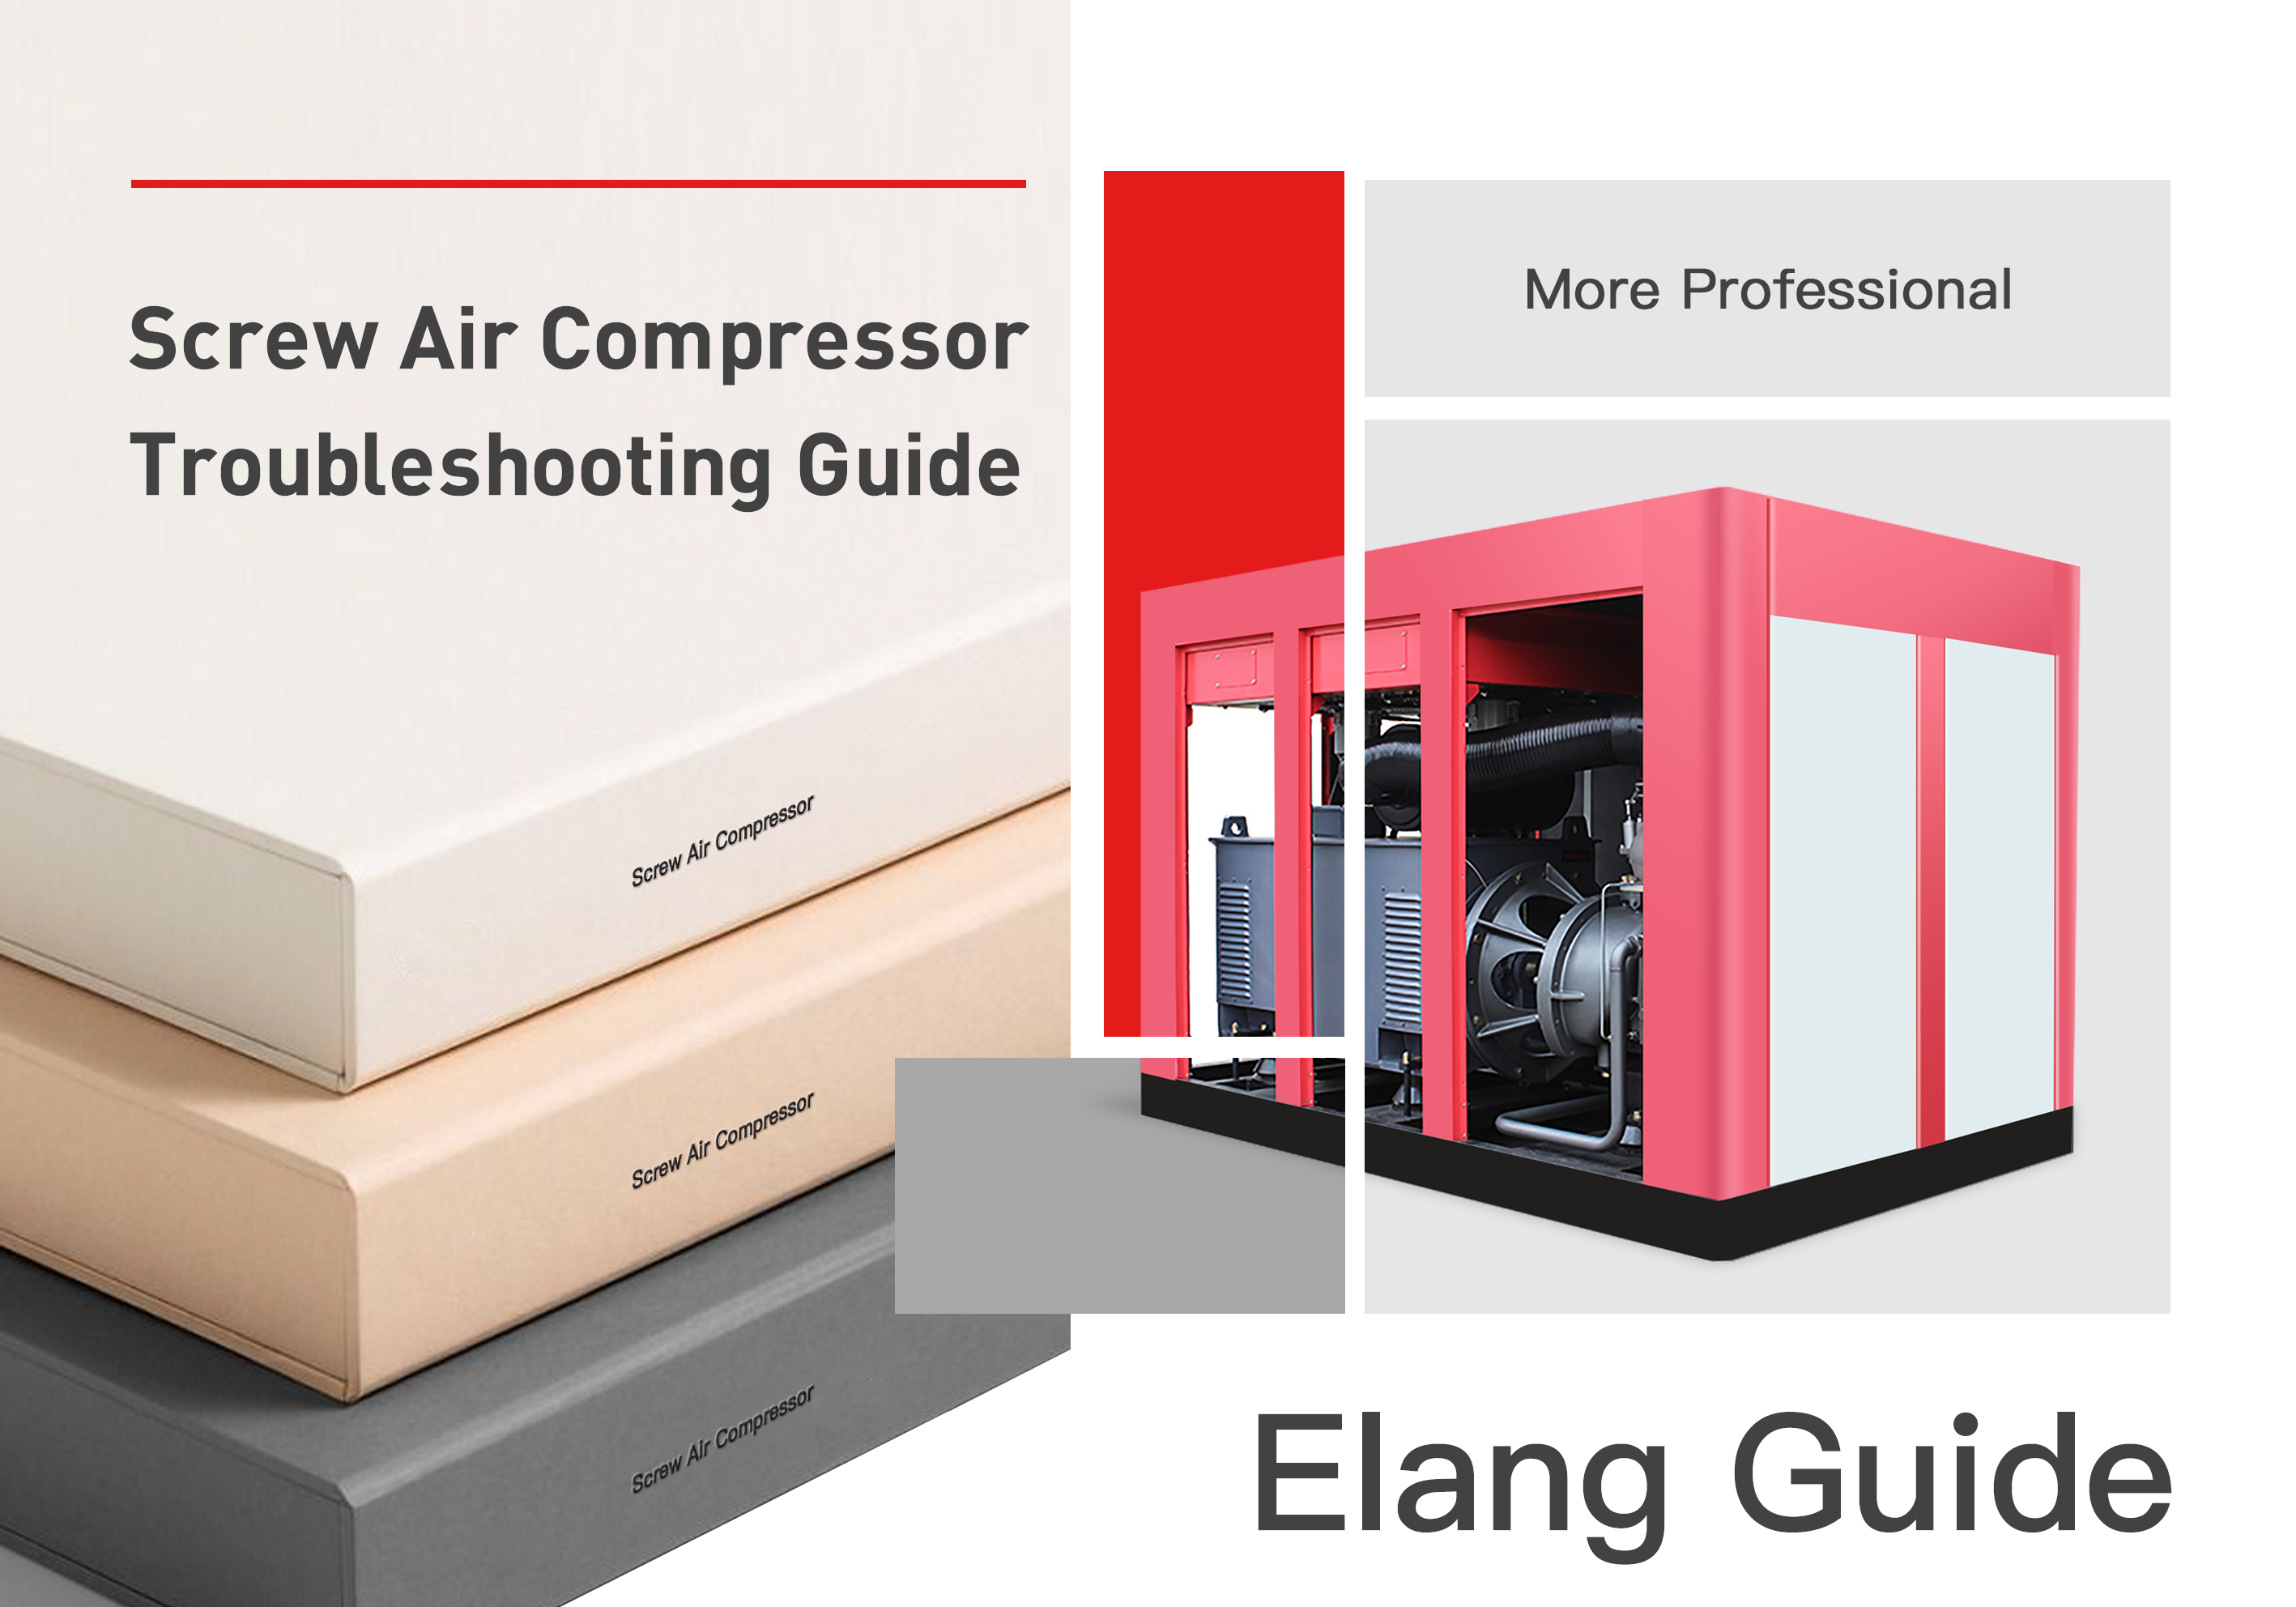 Screw Air Compressor troubleshooting Guide